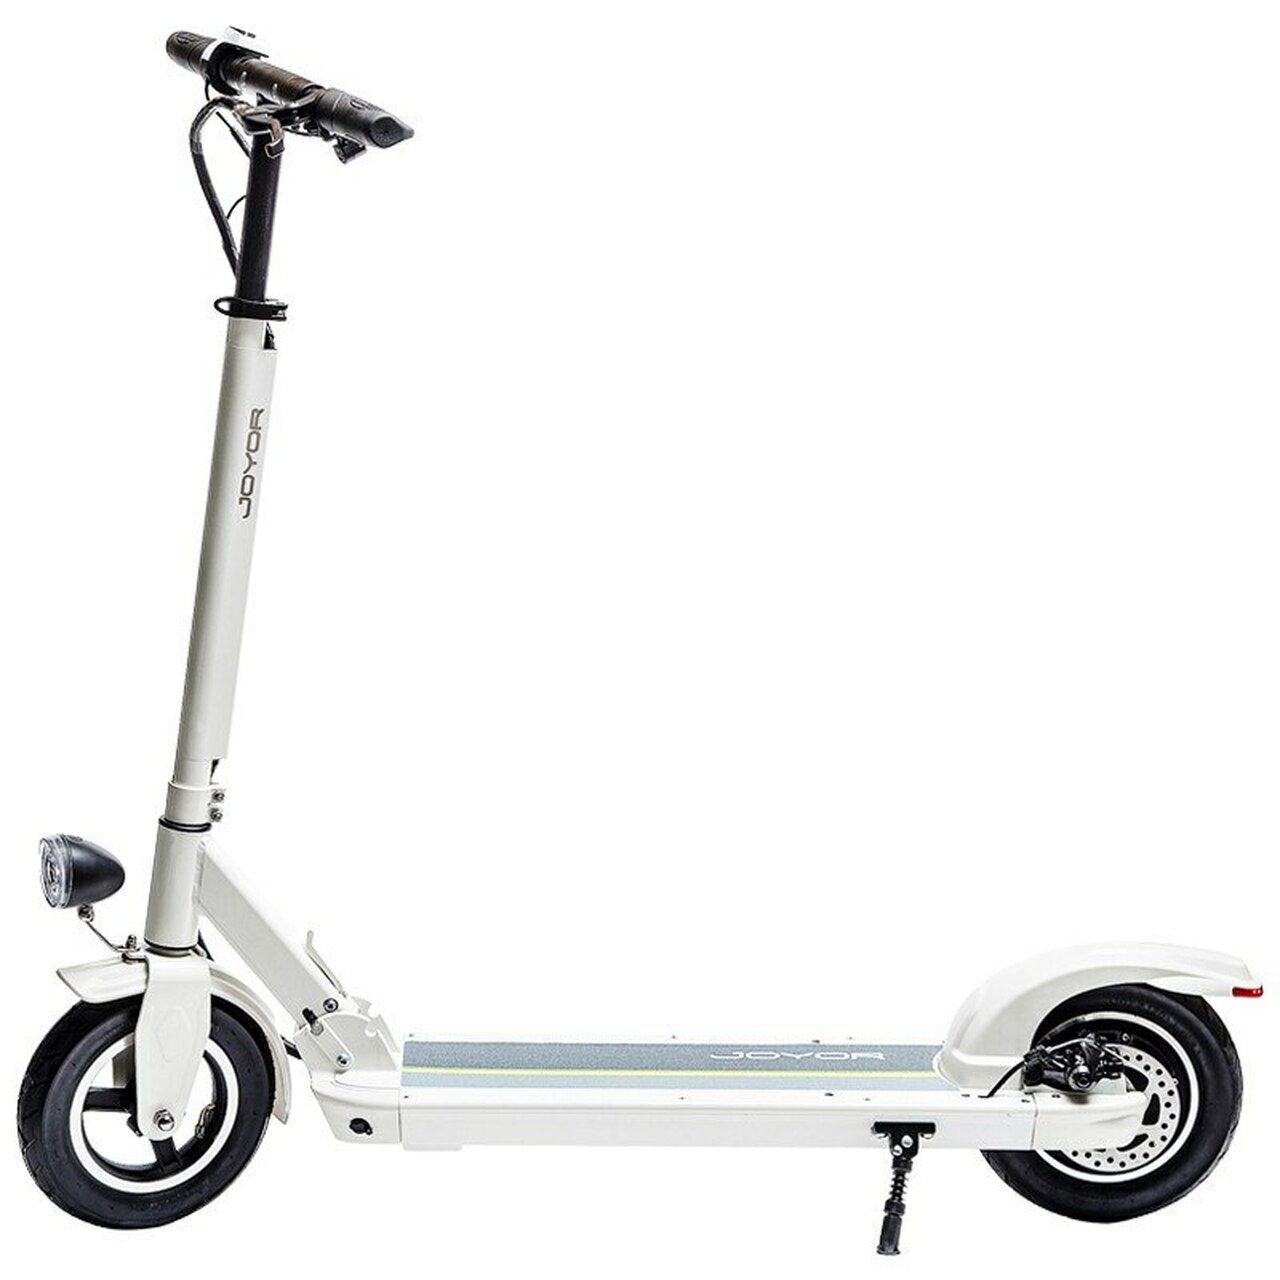 Joyor X5 Up to 36.9 Mile Range 10" Tires Electric Scooter White New